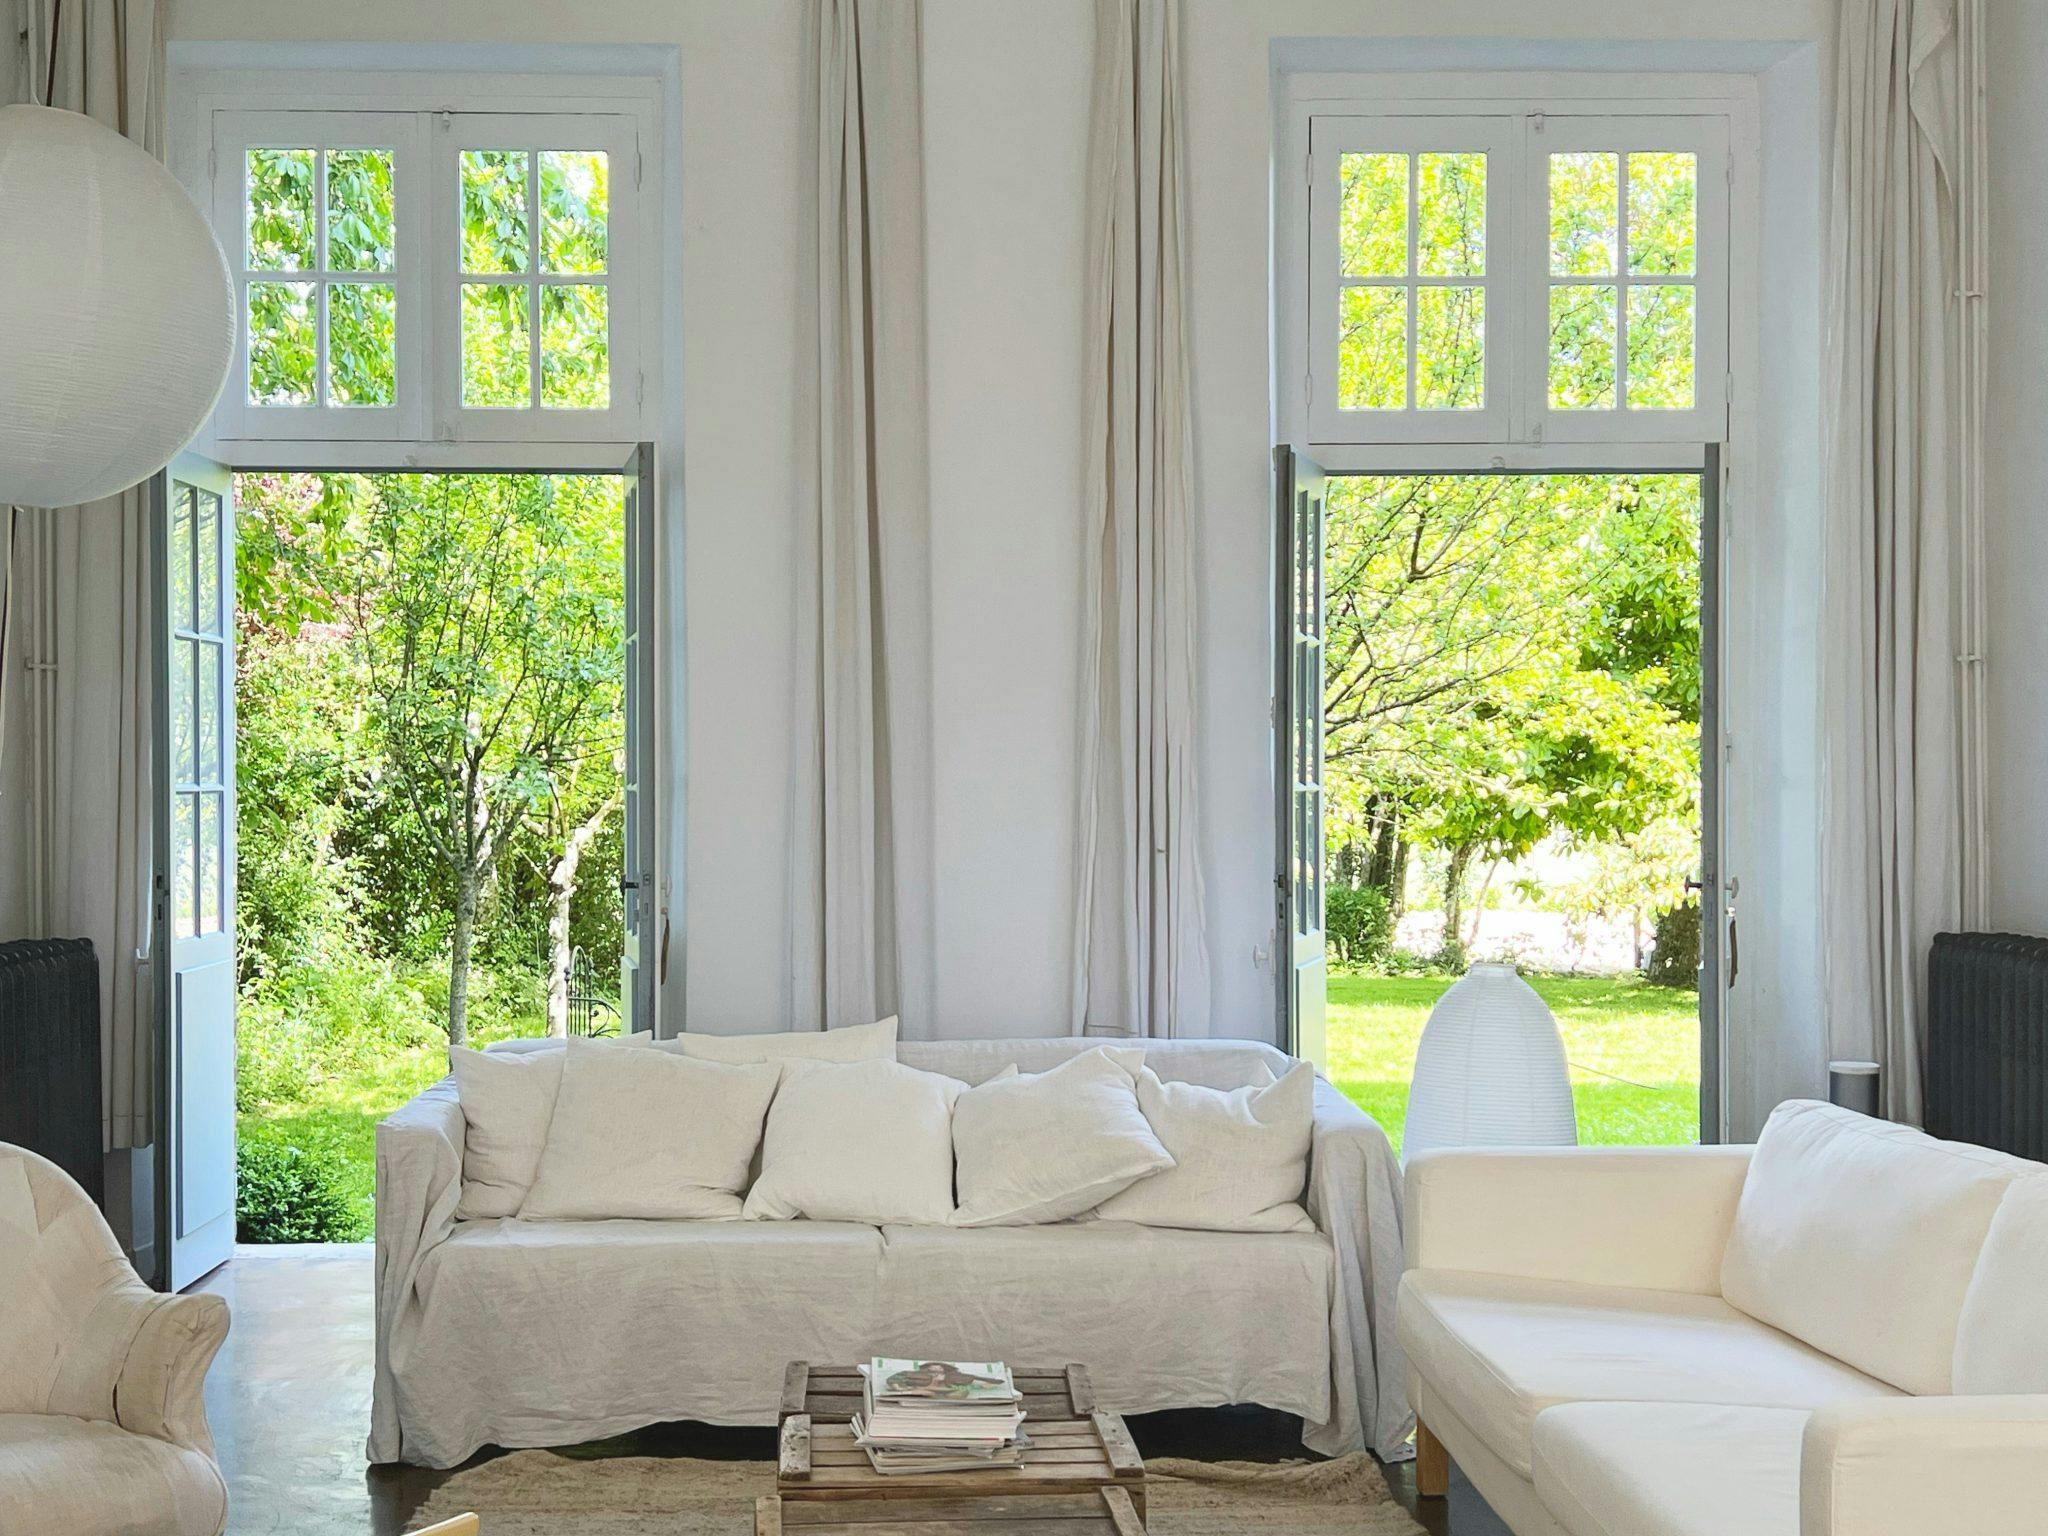 The living room of the Couvent des Ormes, 3 white couches